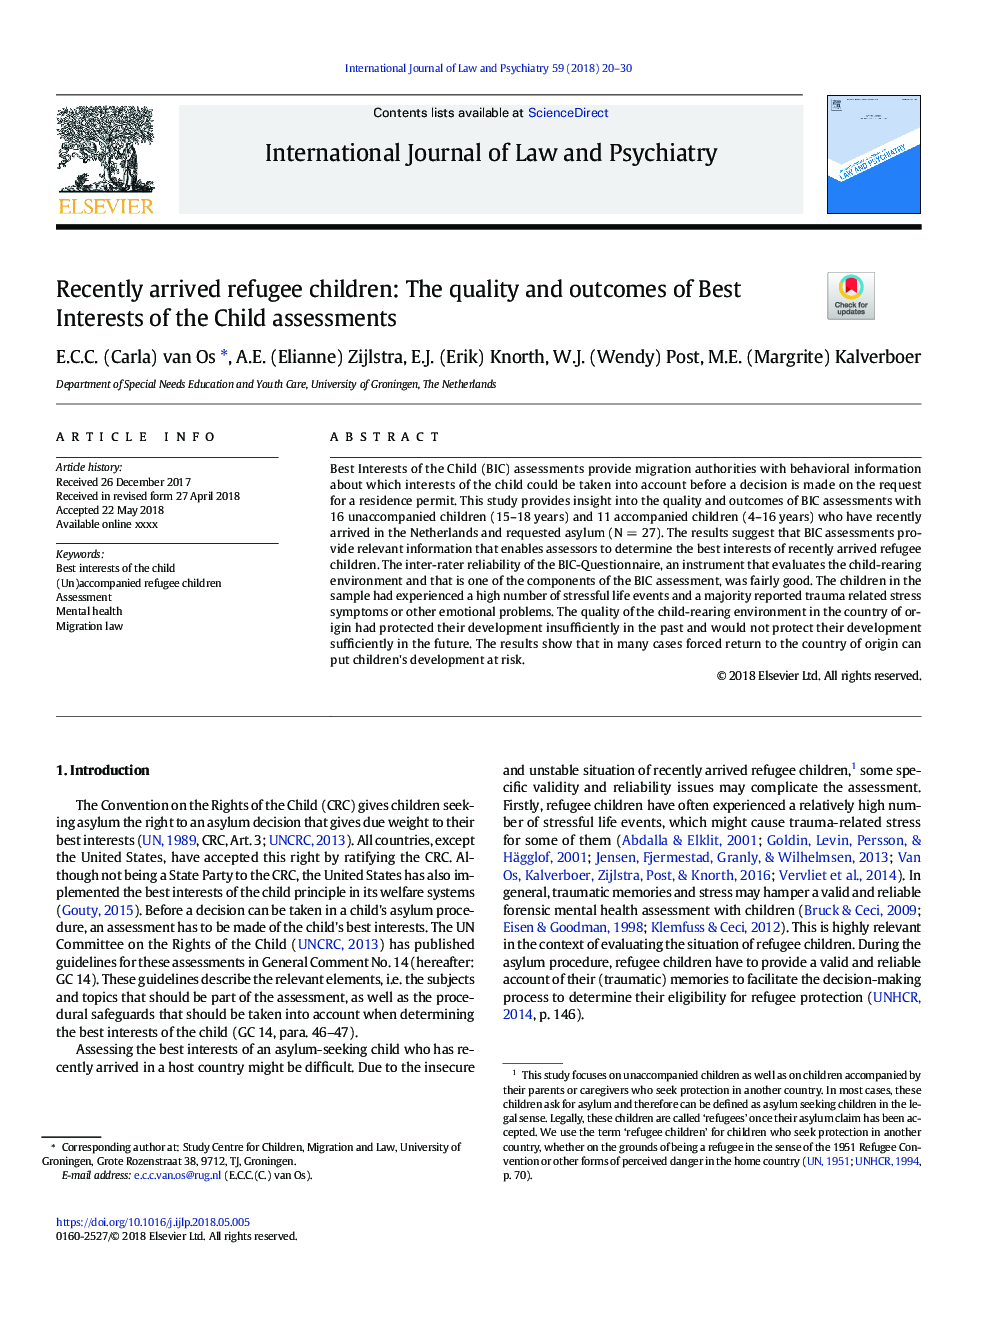 Recently arrived refugee children: The quality and outcomes of Best Interests of the Child assessments